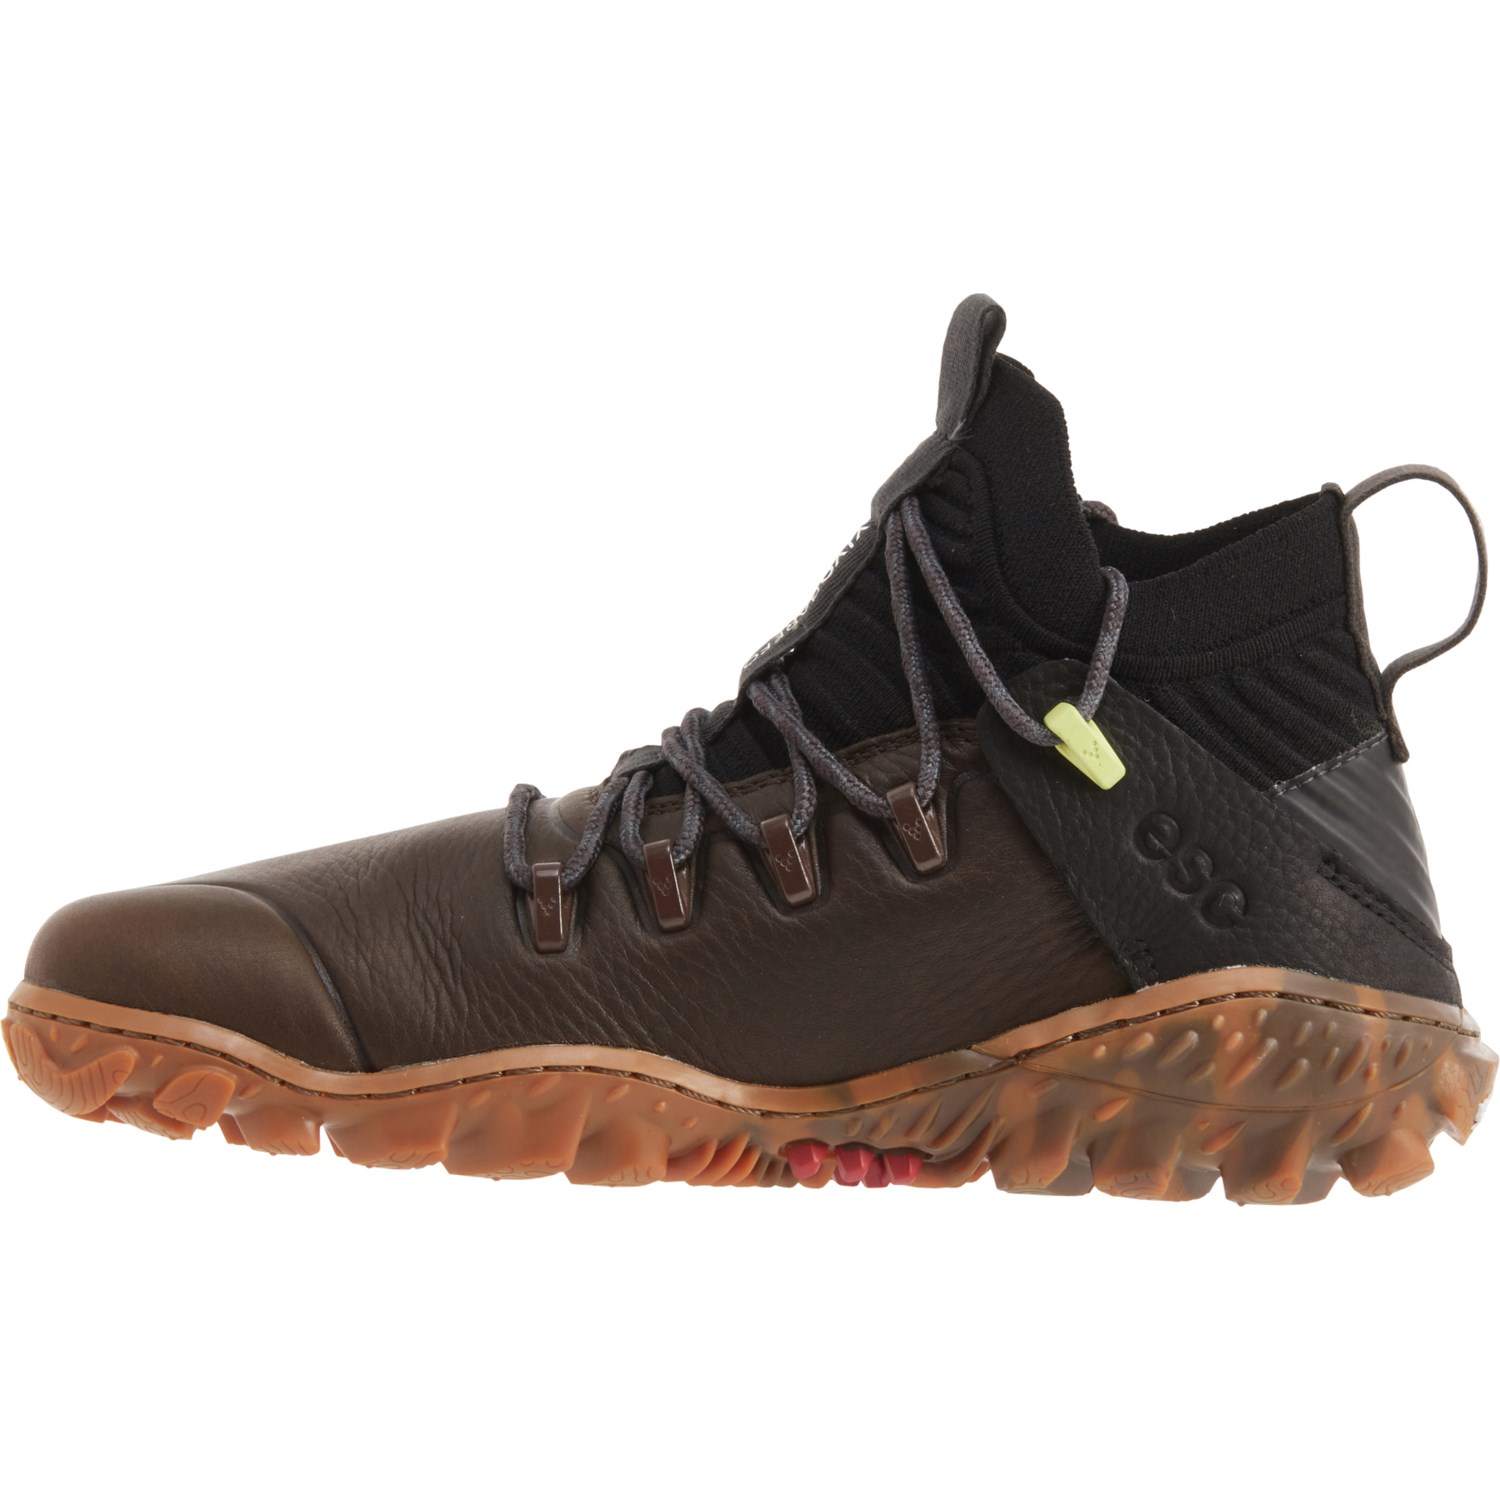 VivoBarefoot Magna Forest ESC Hiking Boots (For Women) - Save 60%